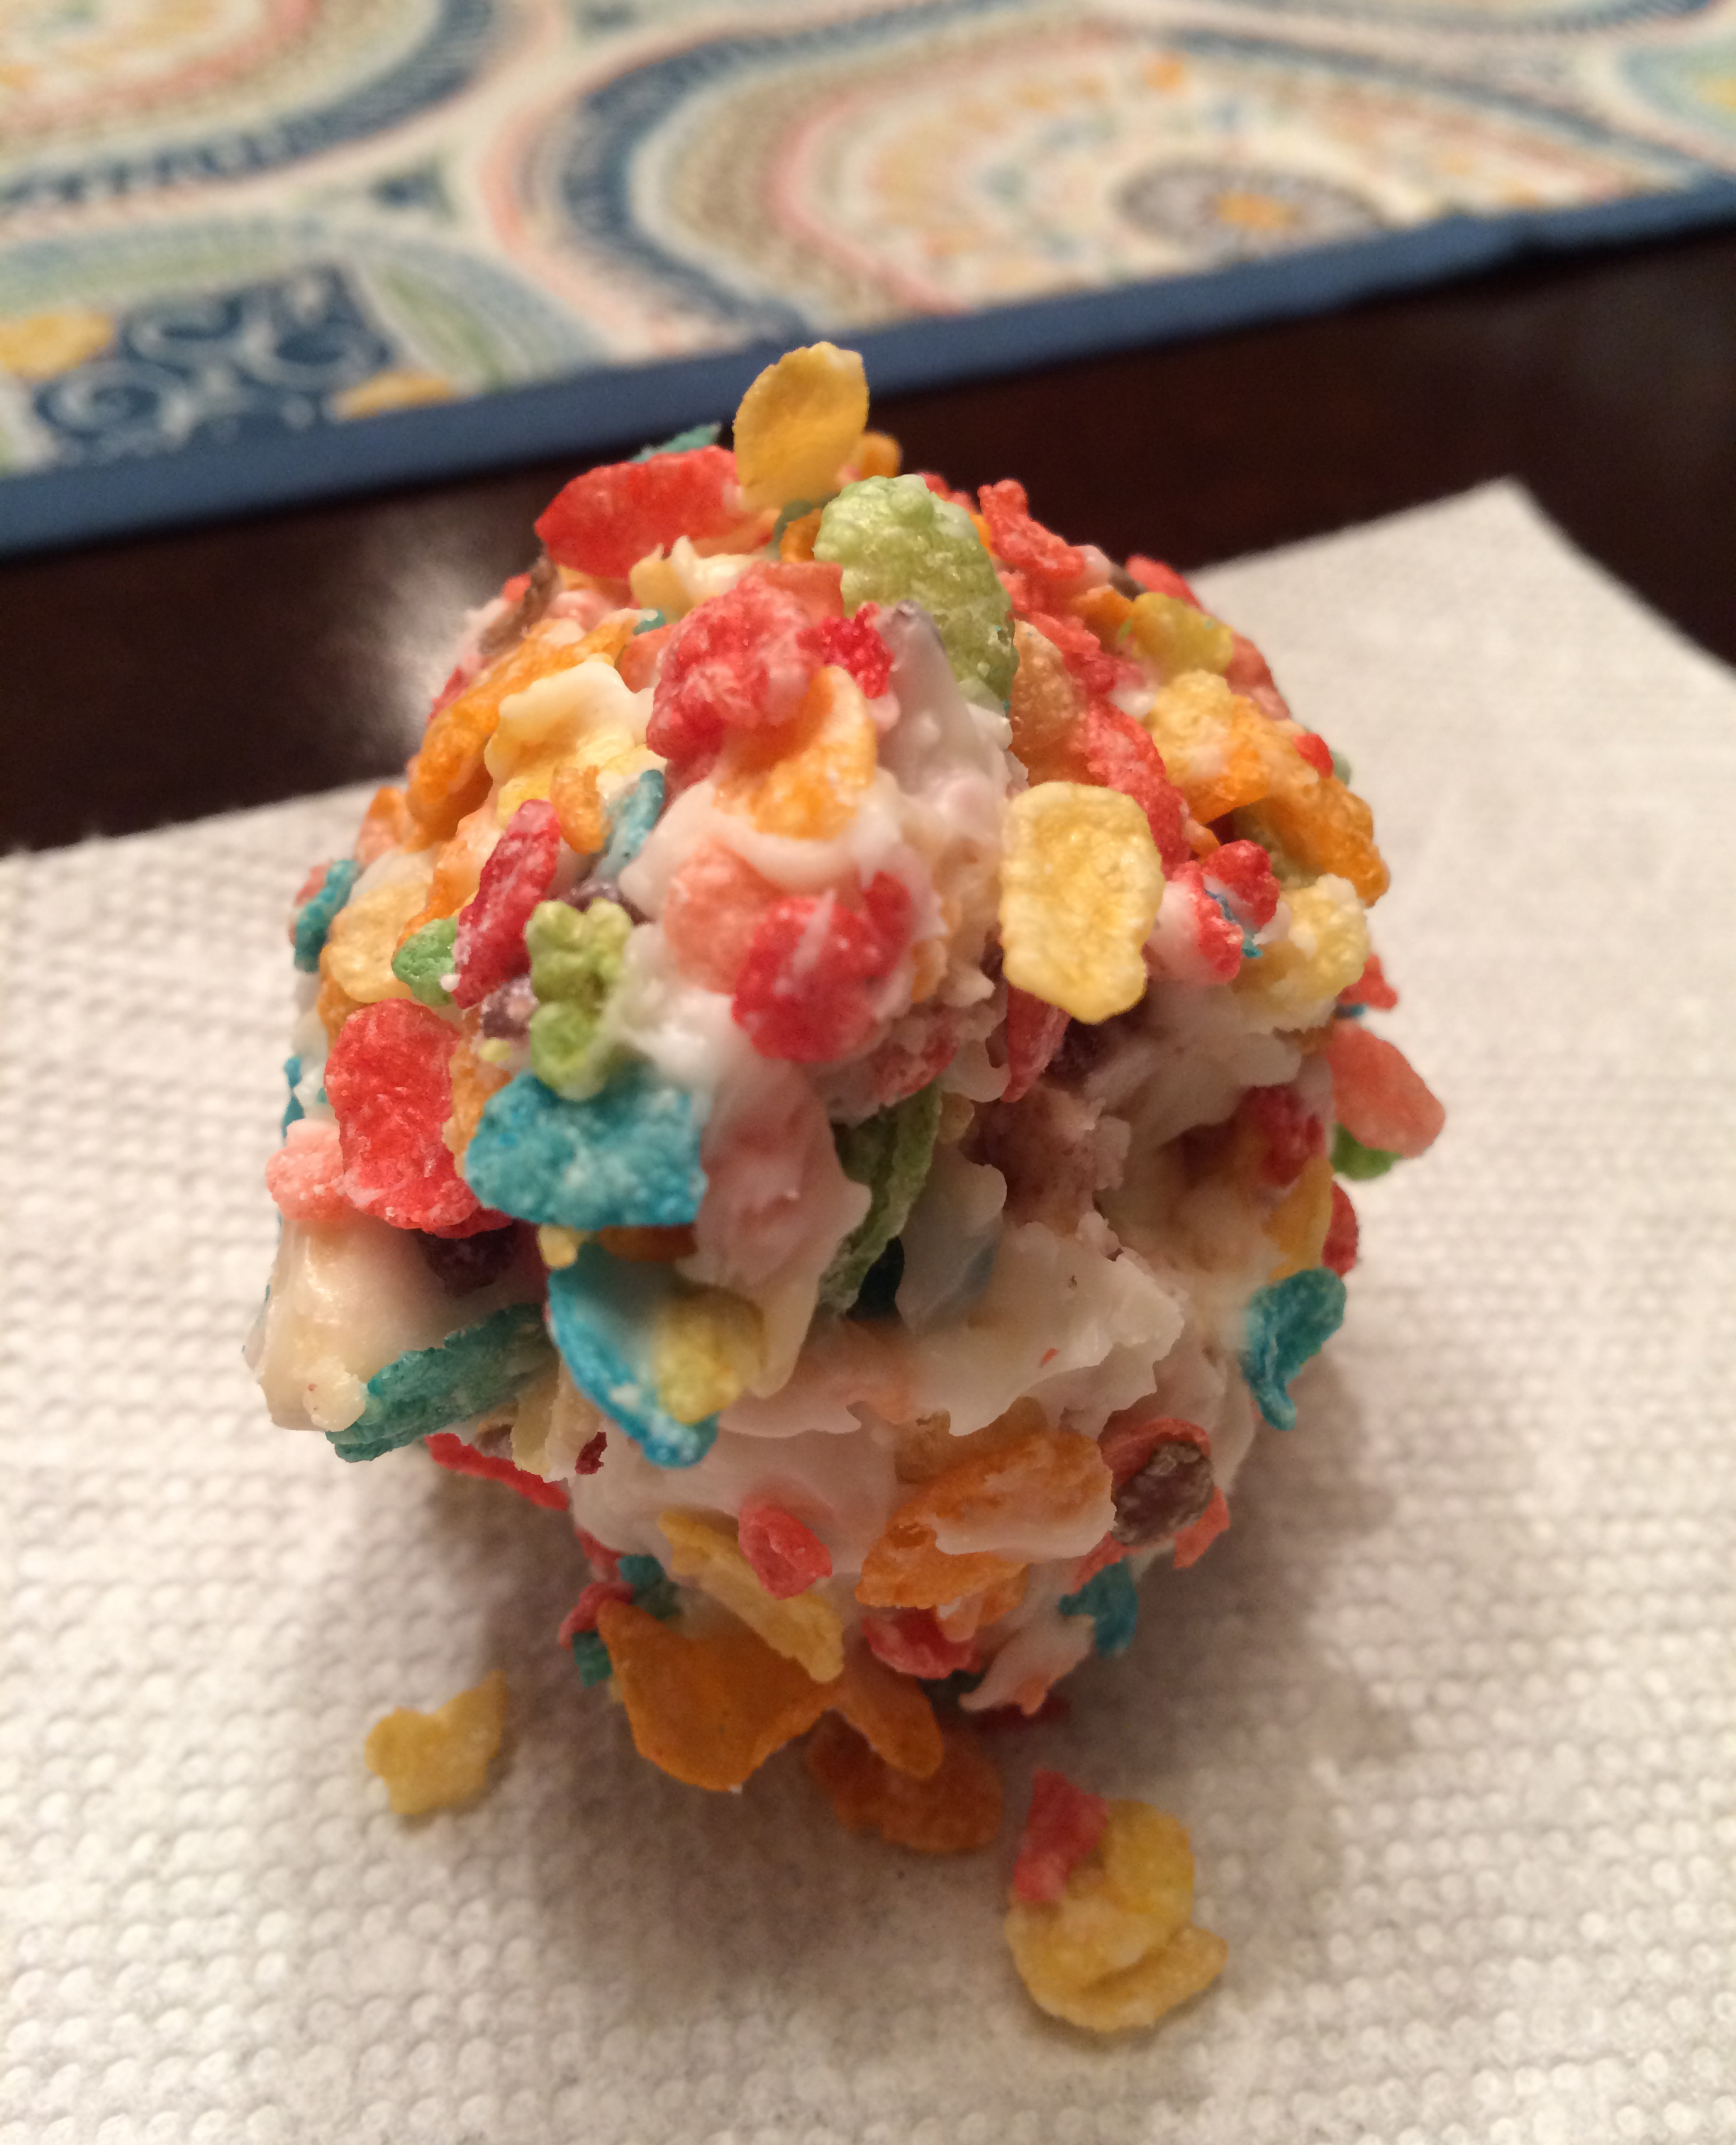 The Fruity Pebbles provided a beautiful and fun touch.